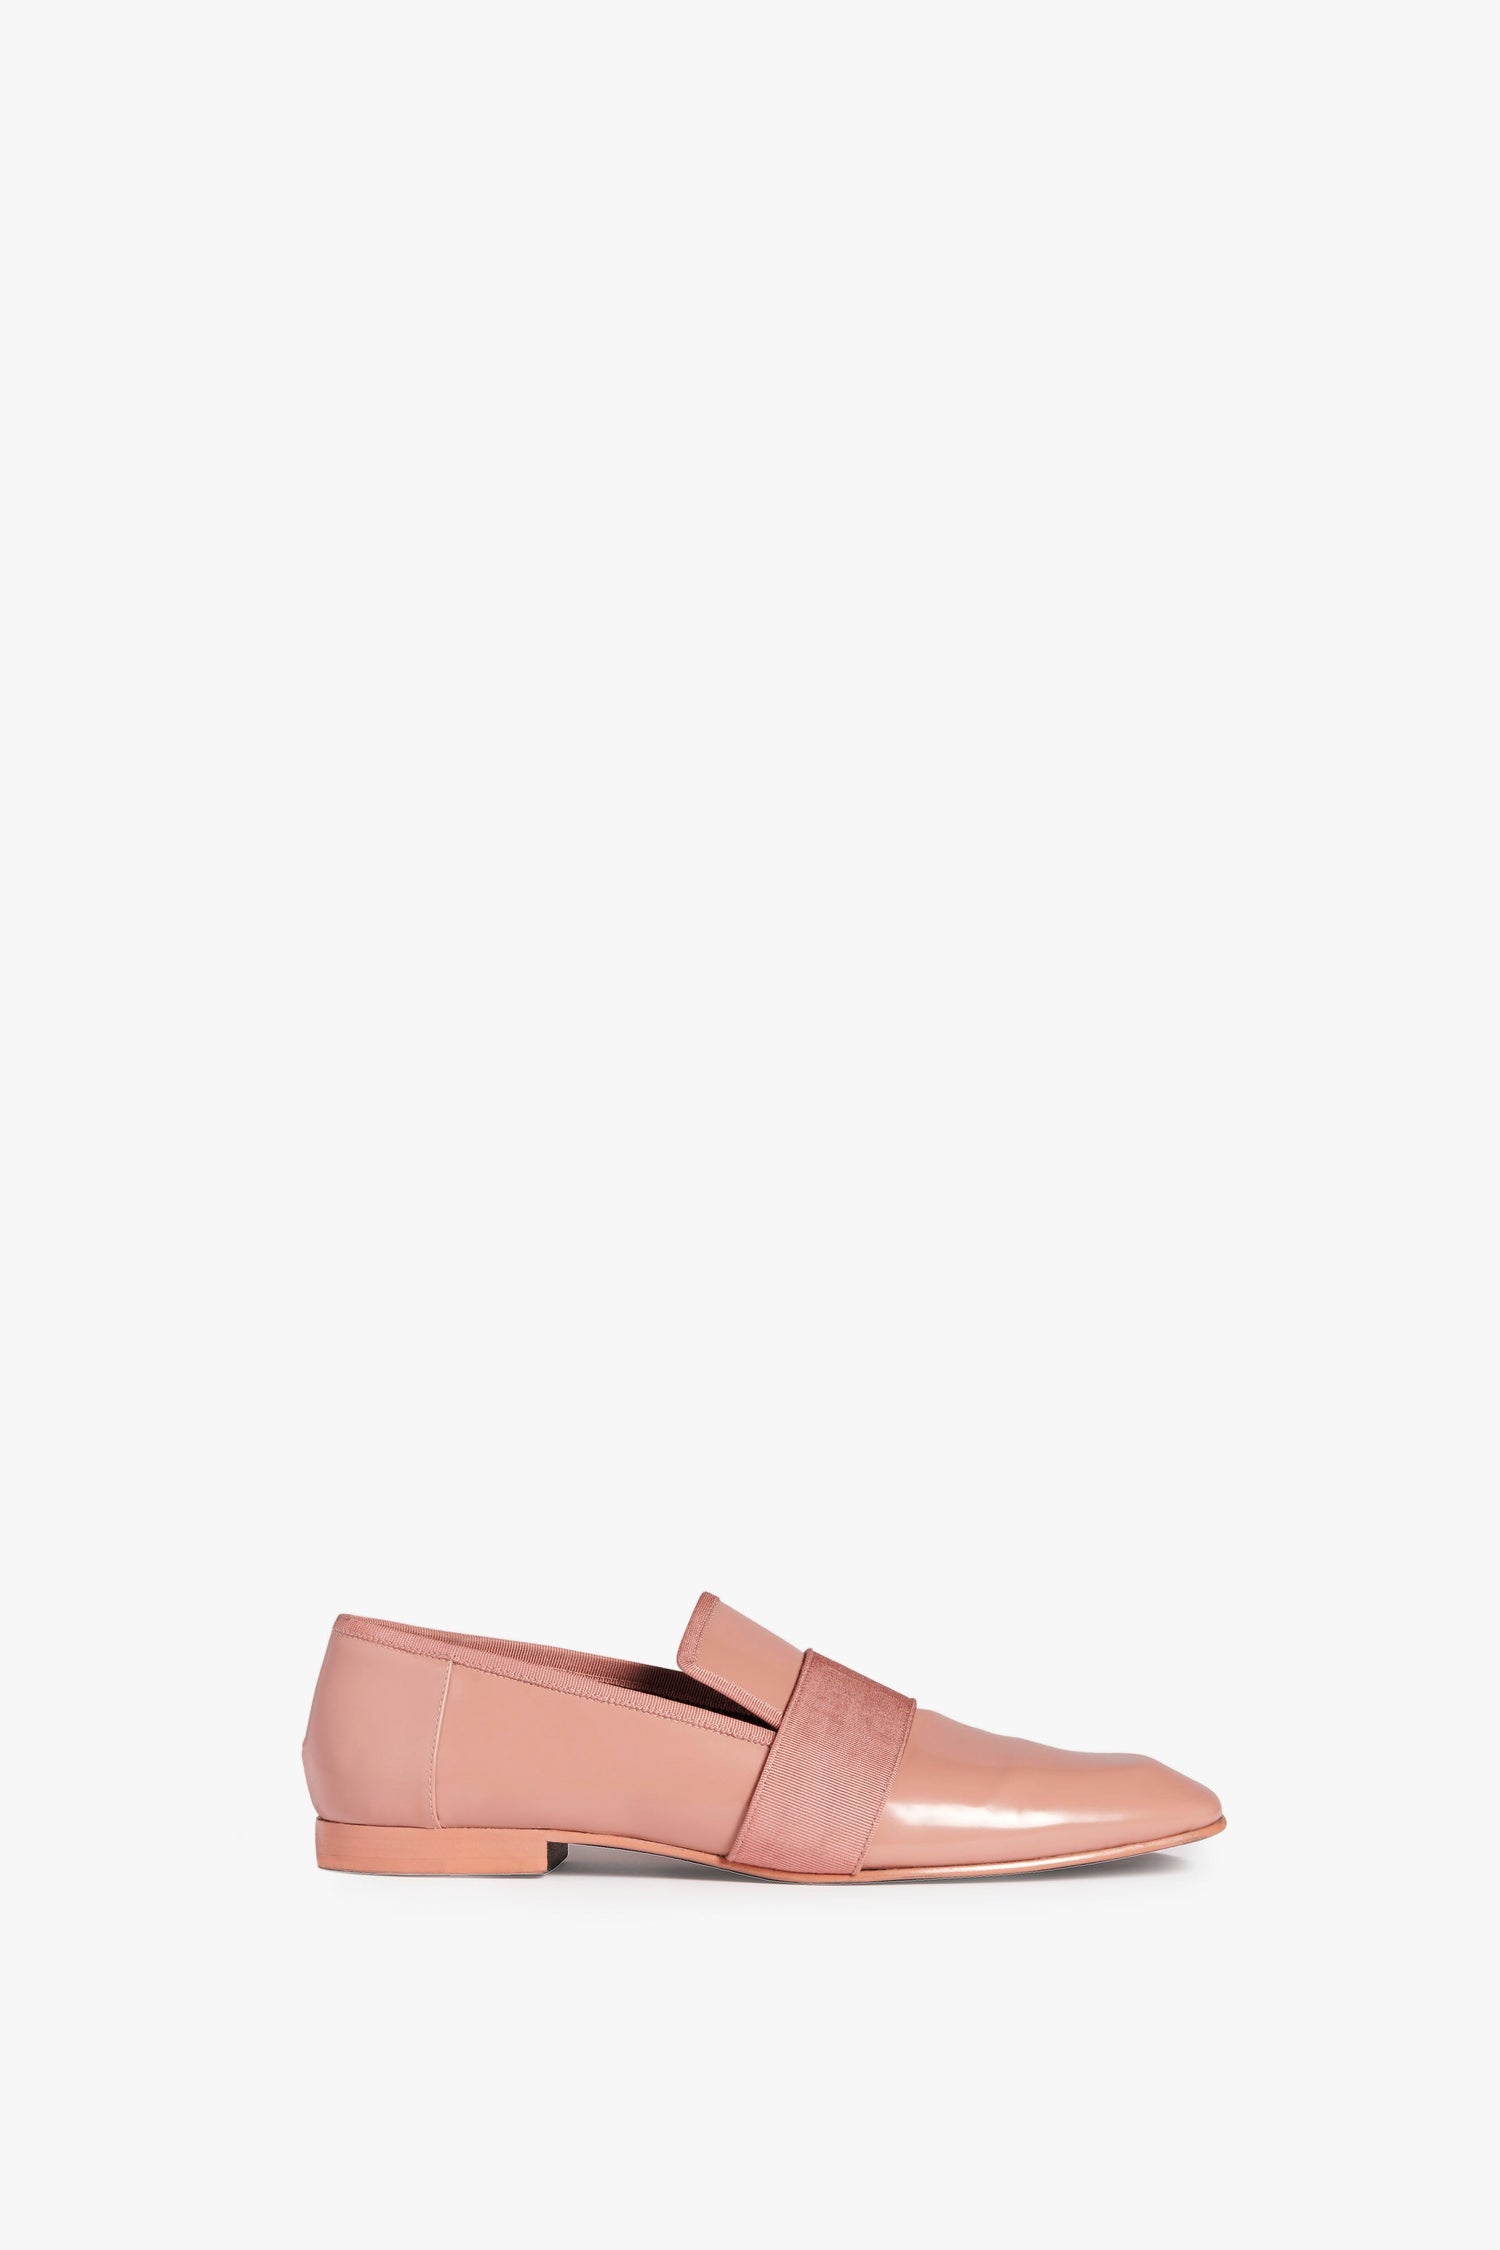 A side view of the Debbie Loafer in Rose by Victoria Beckham, showcasing a square-toe design and a low heel, with a wide elastic band across the instep.